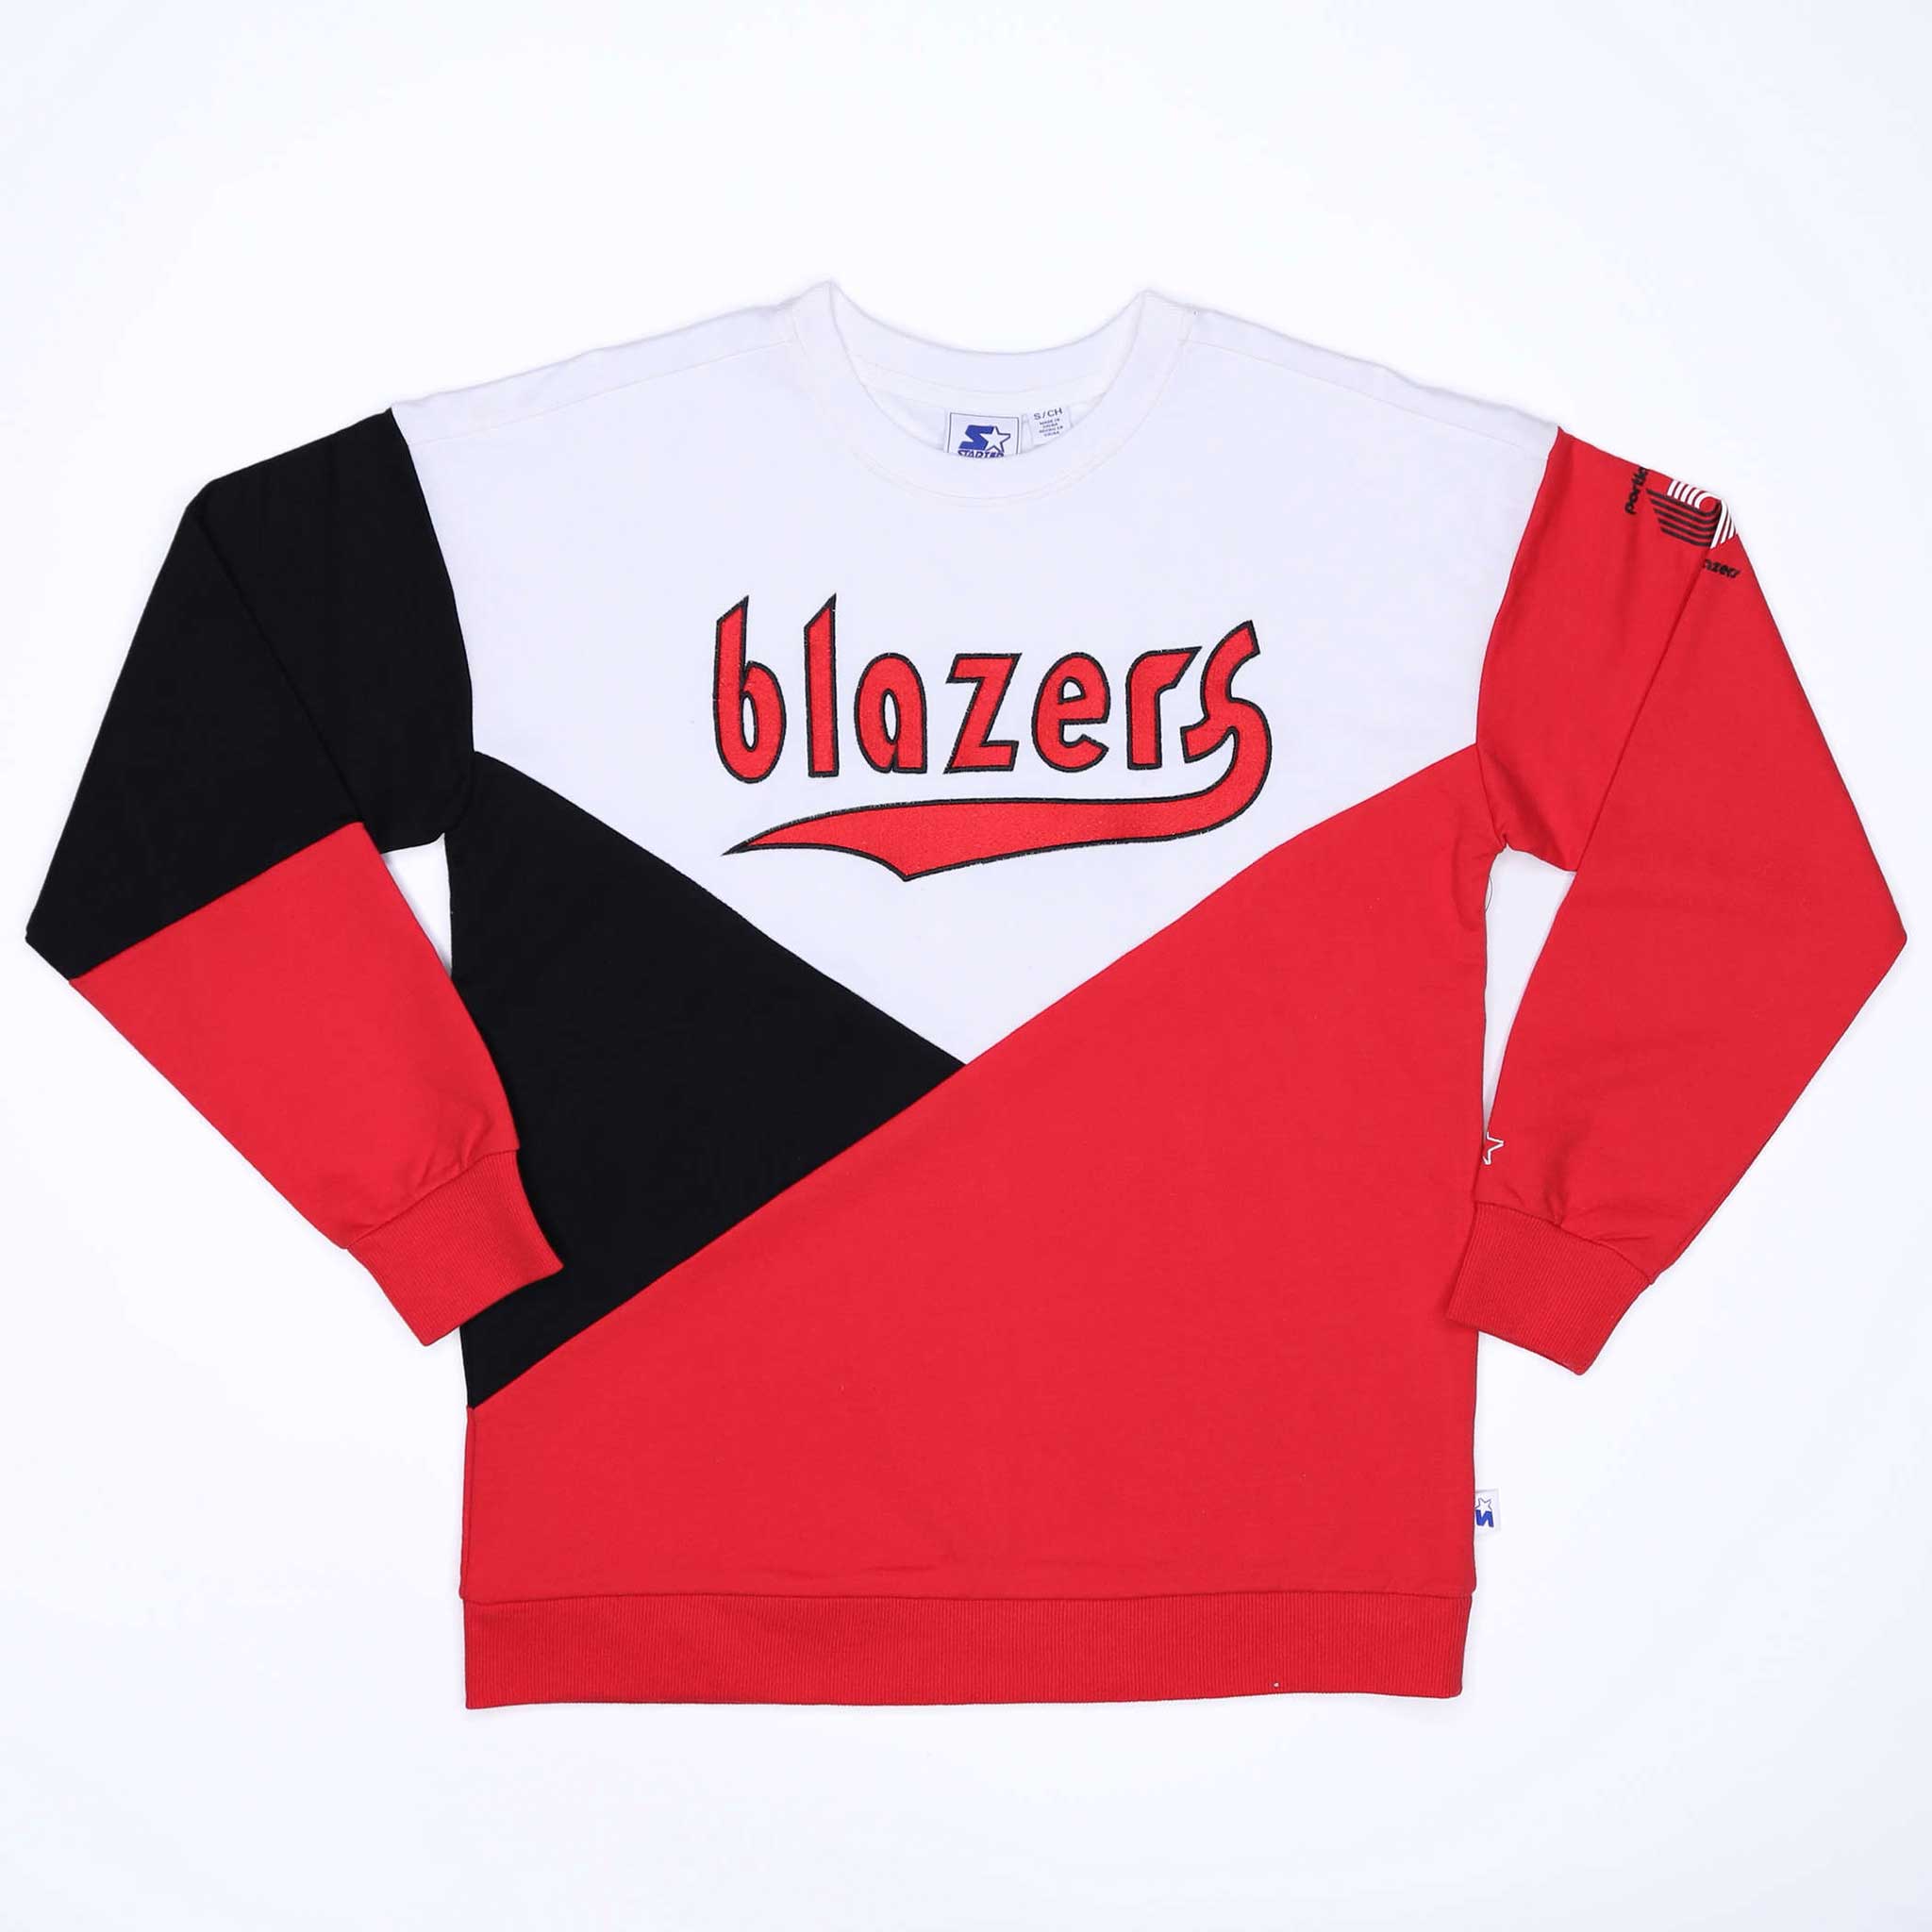 Show Your Support for the Trail Blazers with Stylish Hoodies and